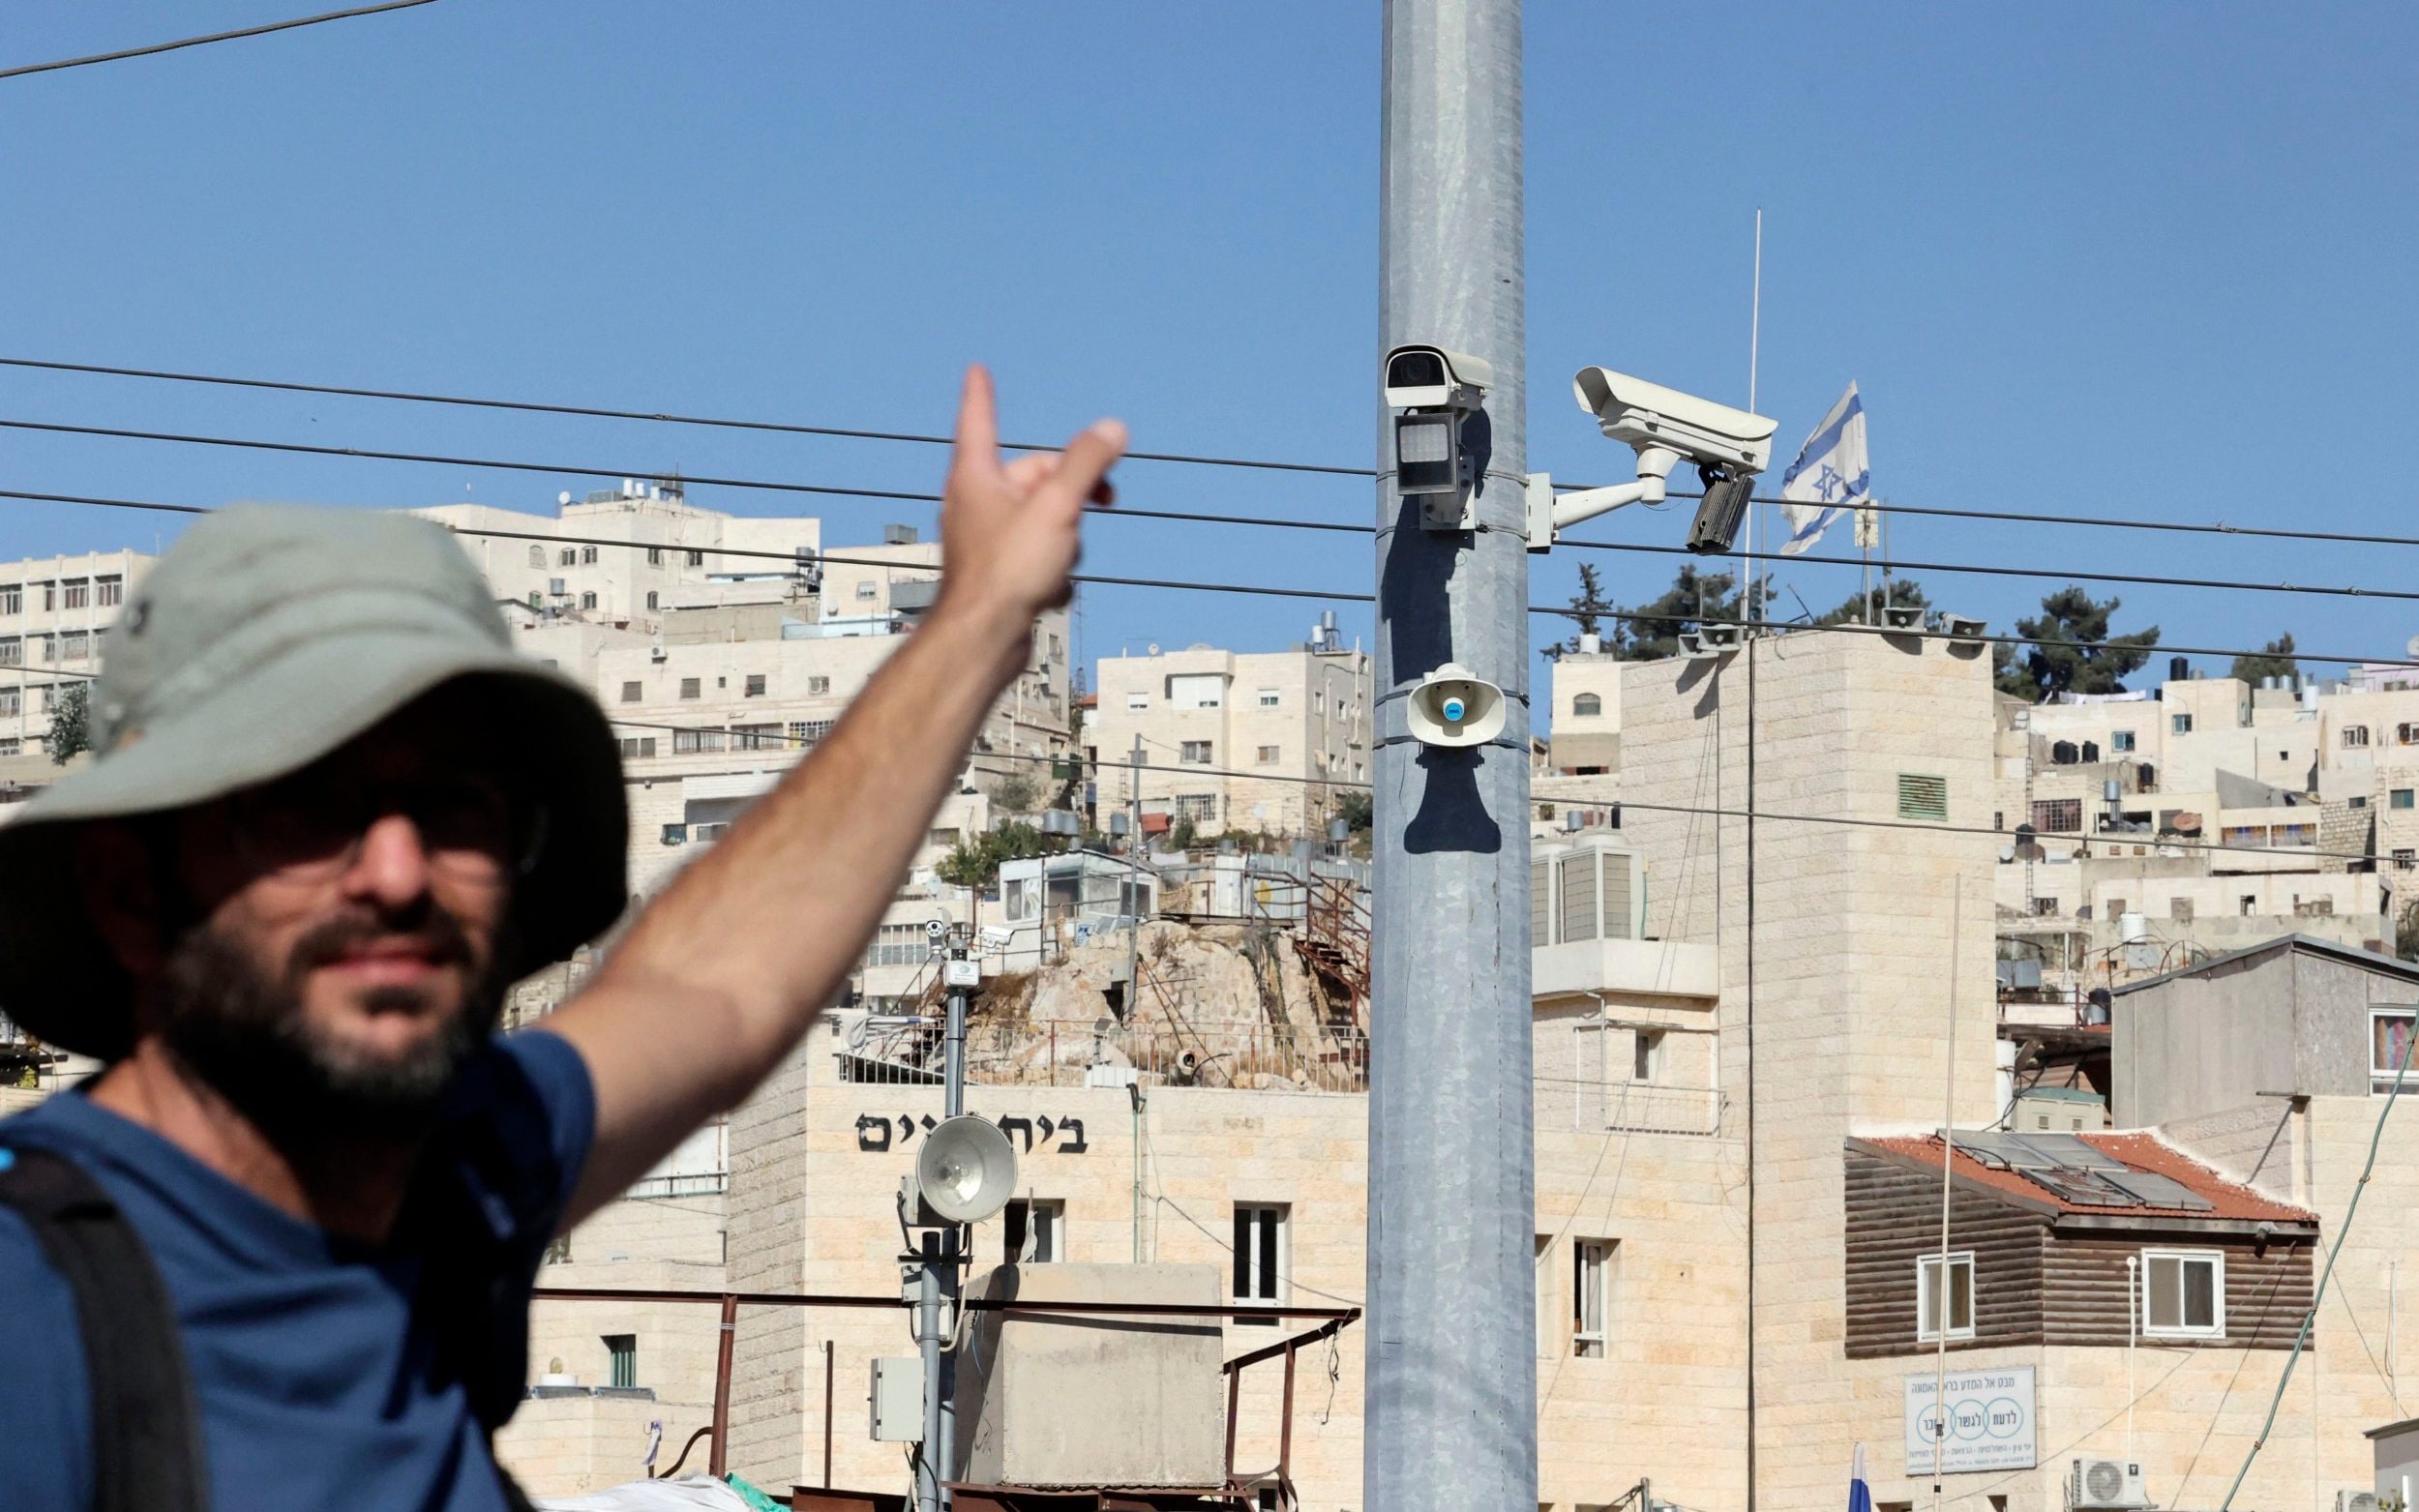 israel is using facial recognition technology to pinpoint hamas terrorists in gaza, reports say